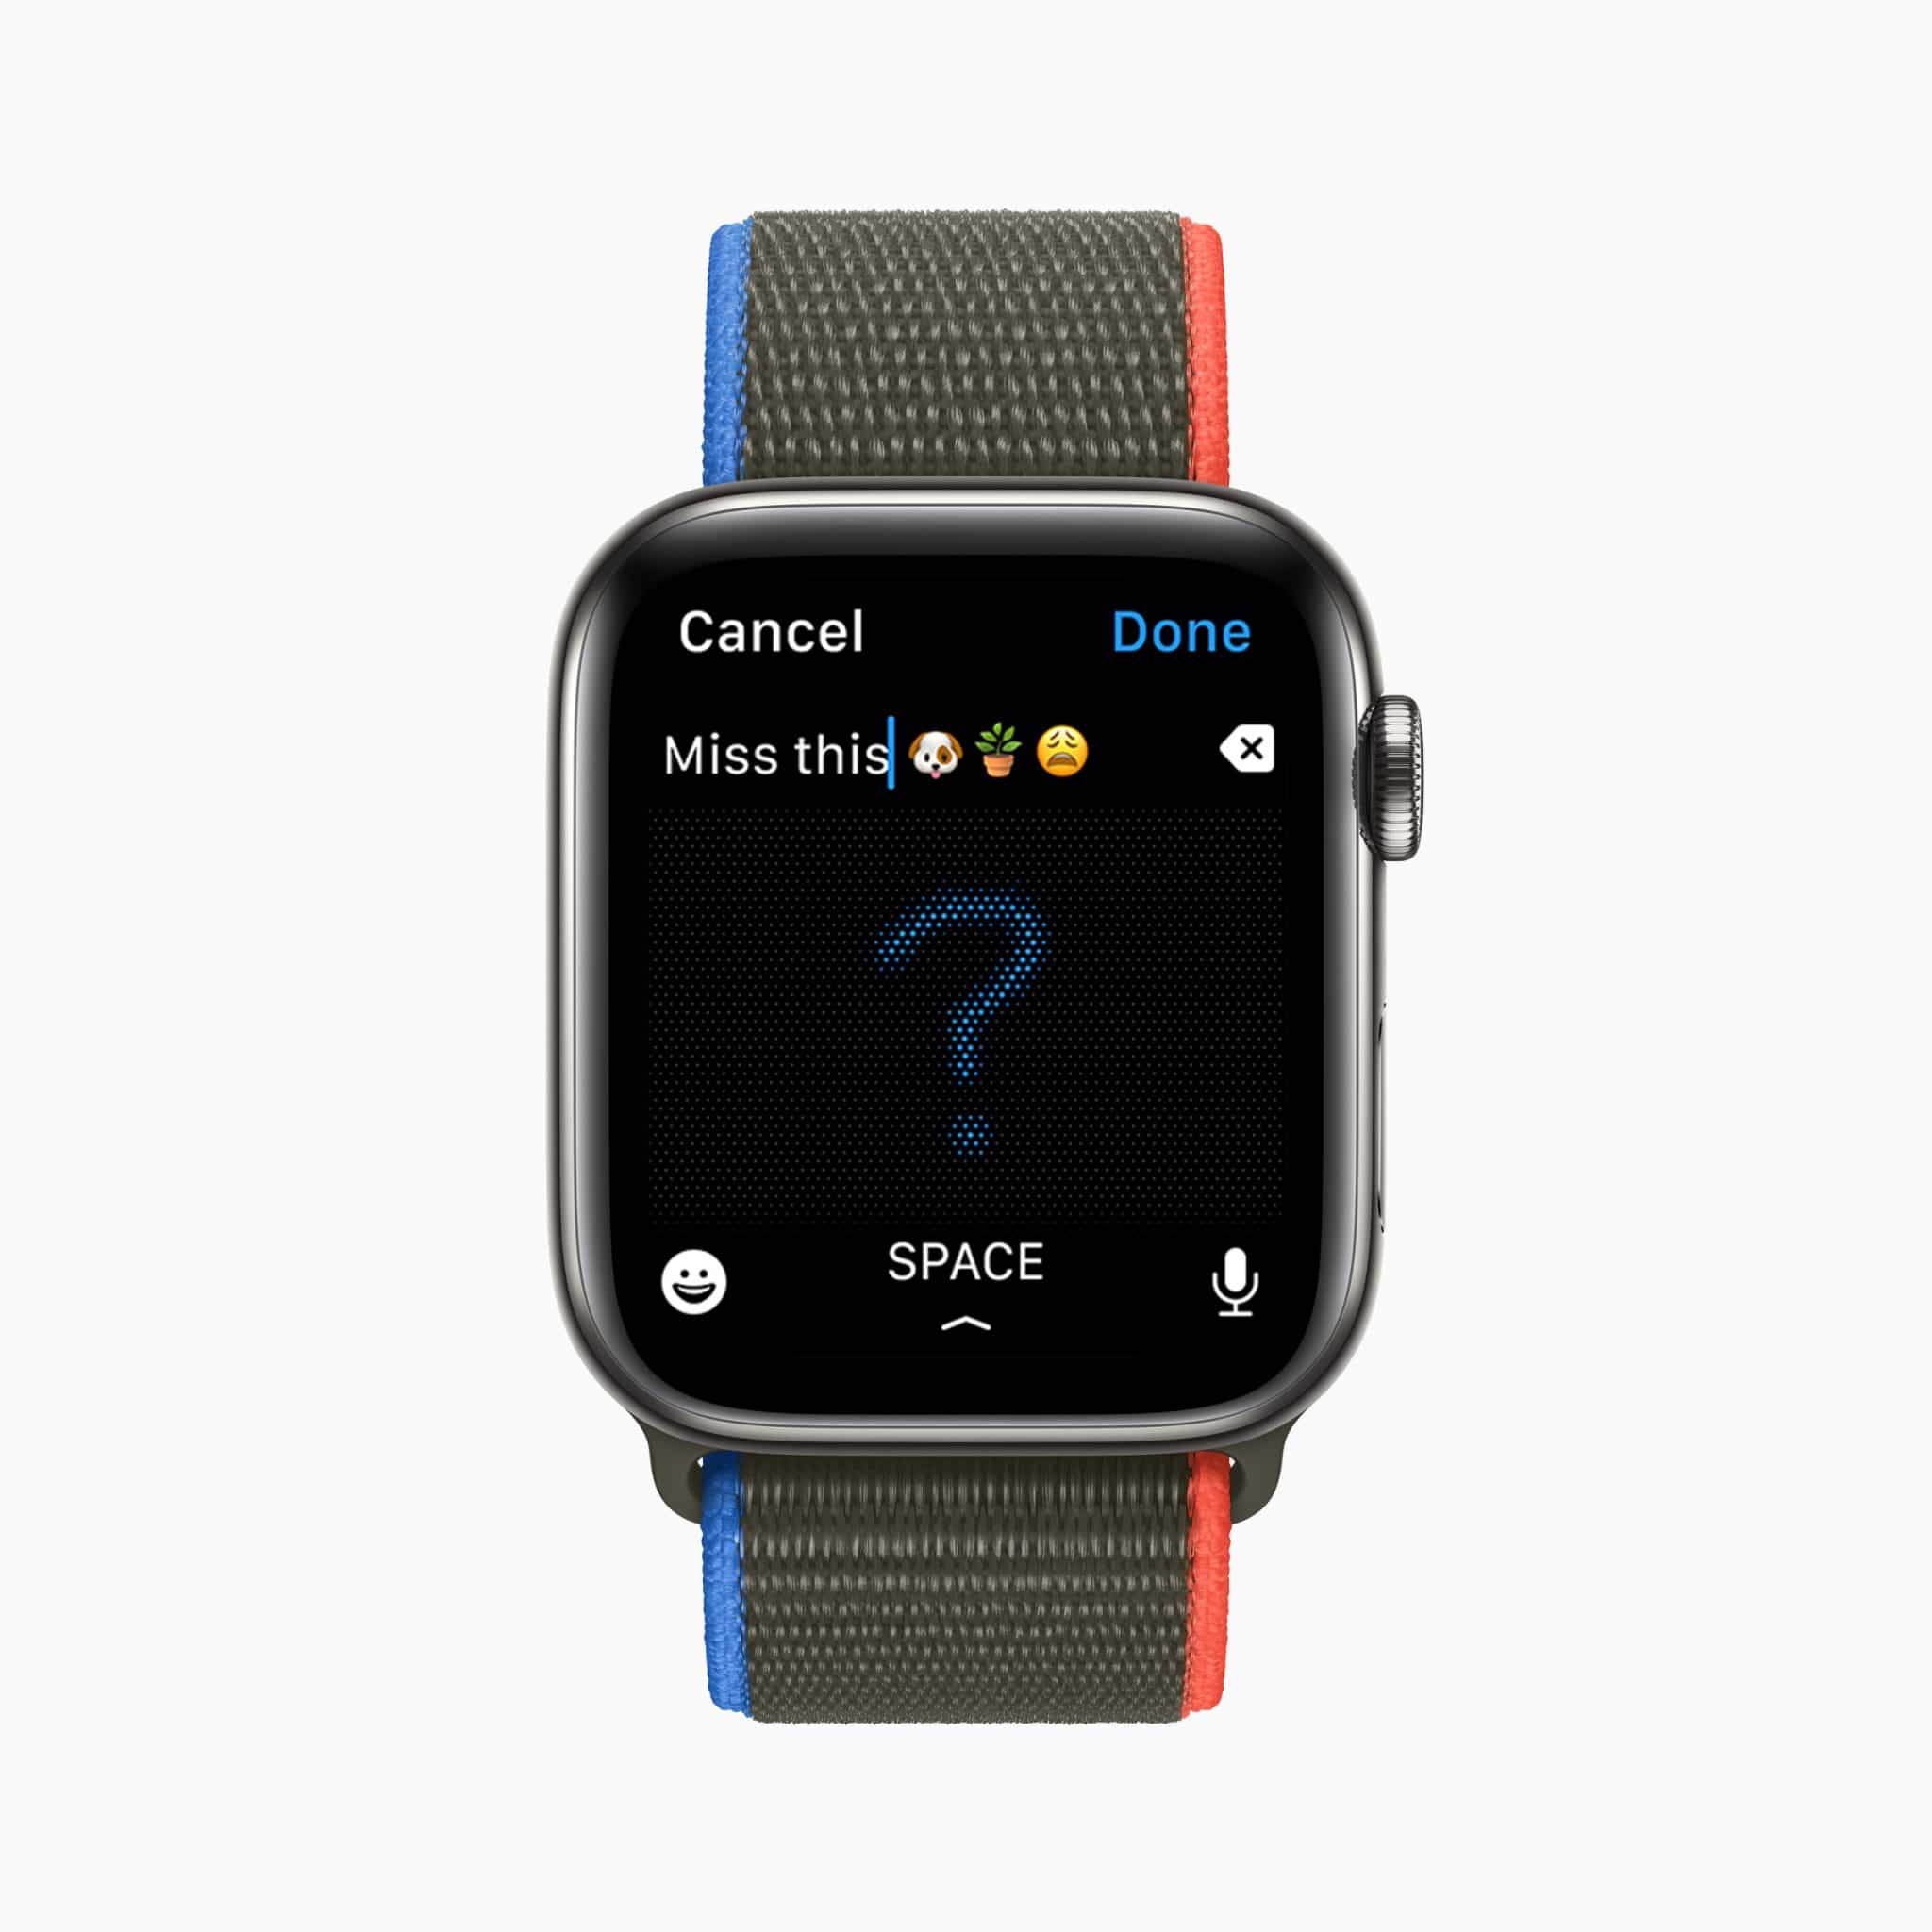 apple_wwdc21-watchos8_messages-scribble_06072021-scaled